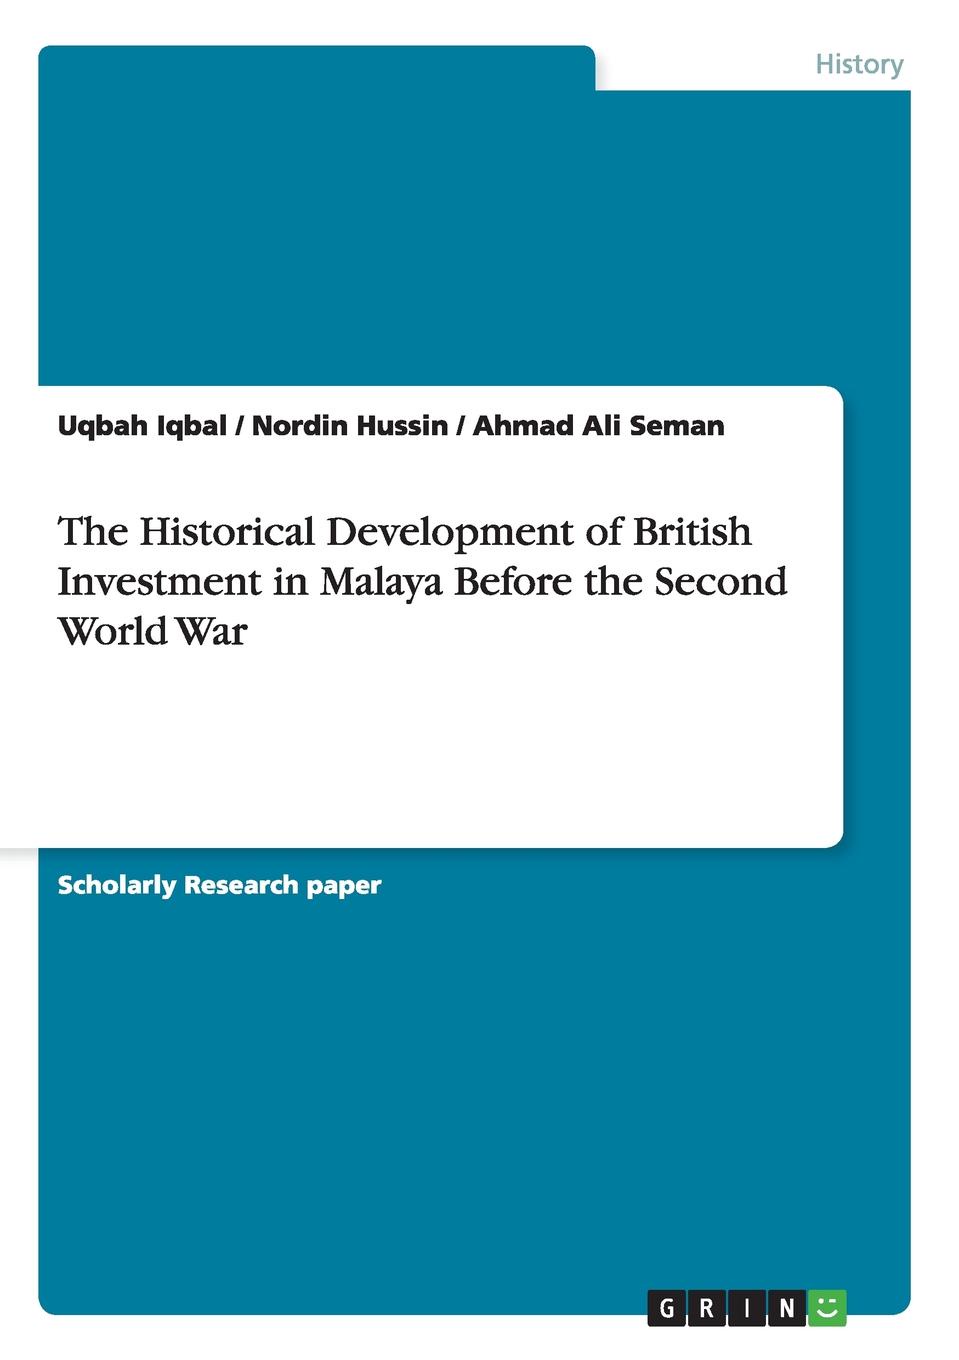 The Historical Development of British Investment in Malaya Before the Second World War